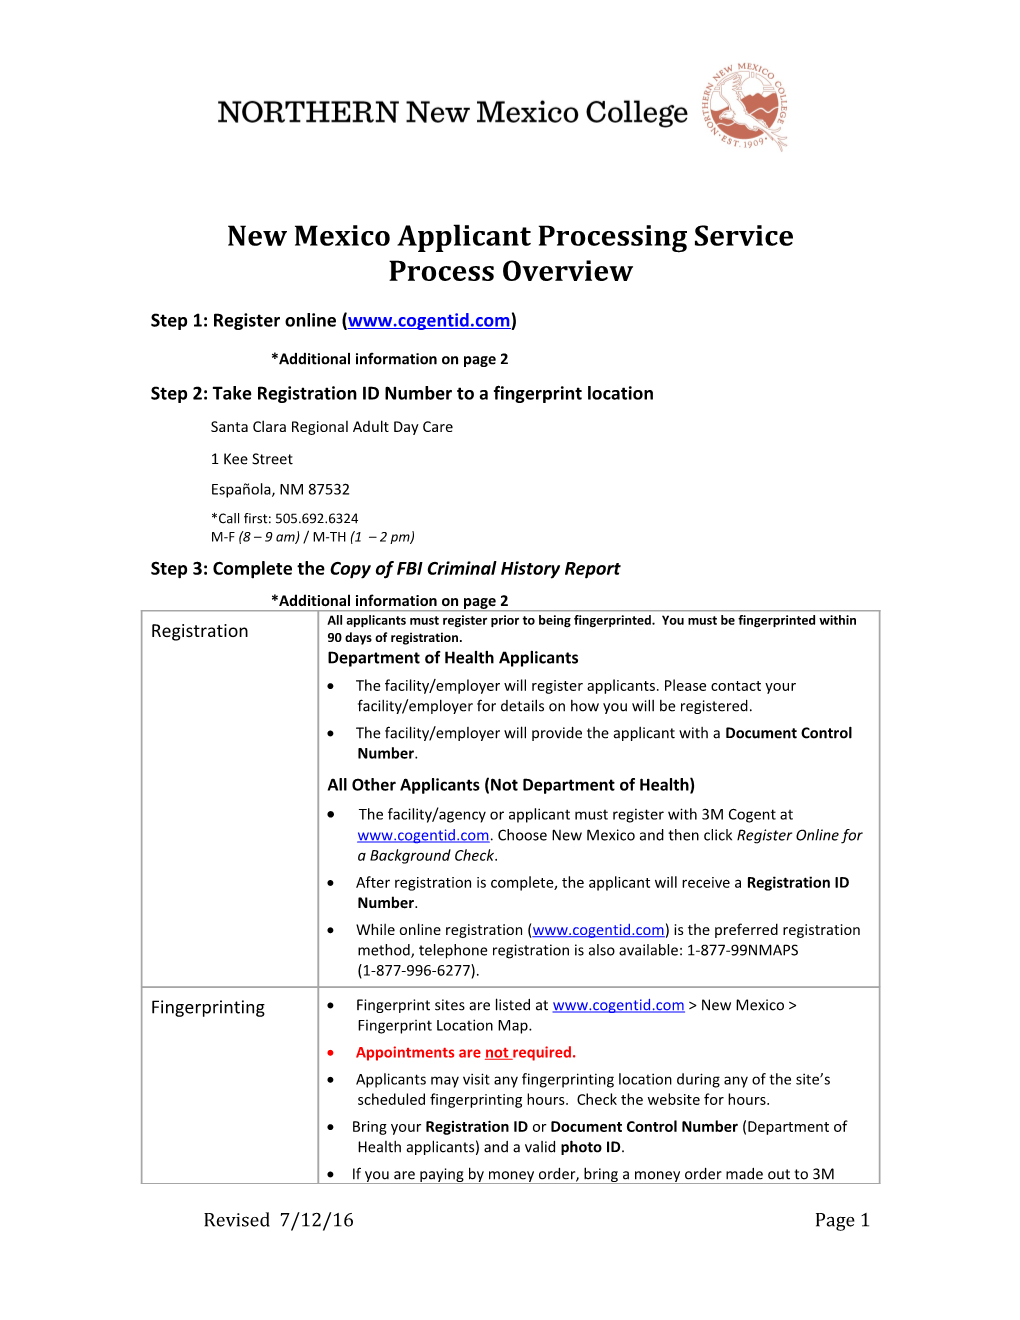 New Mexico Applicant Processing Service Process Overview